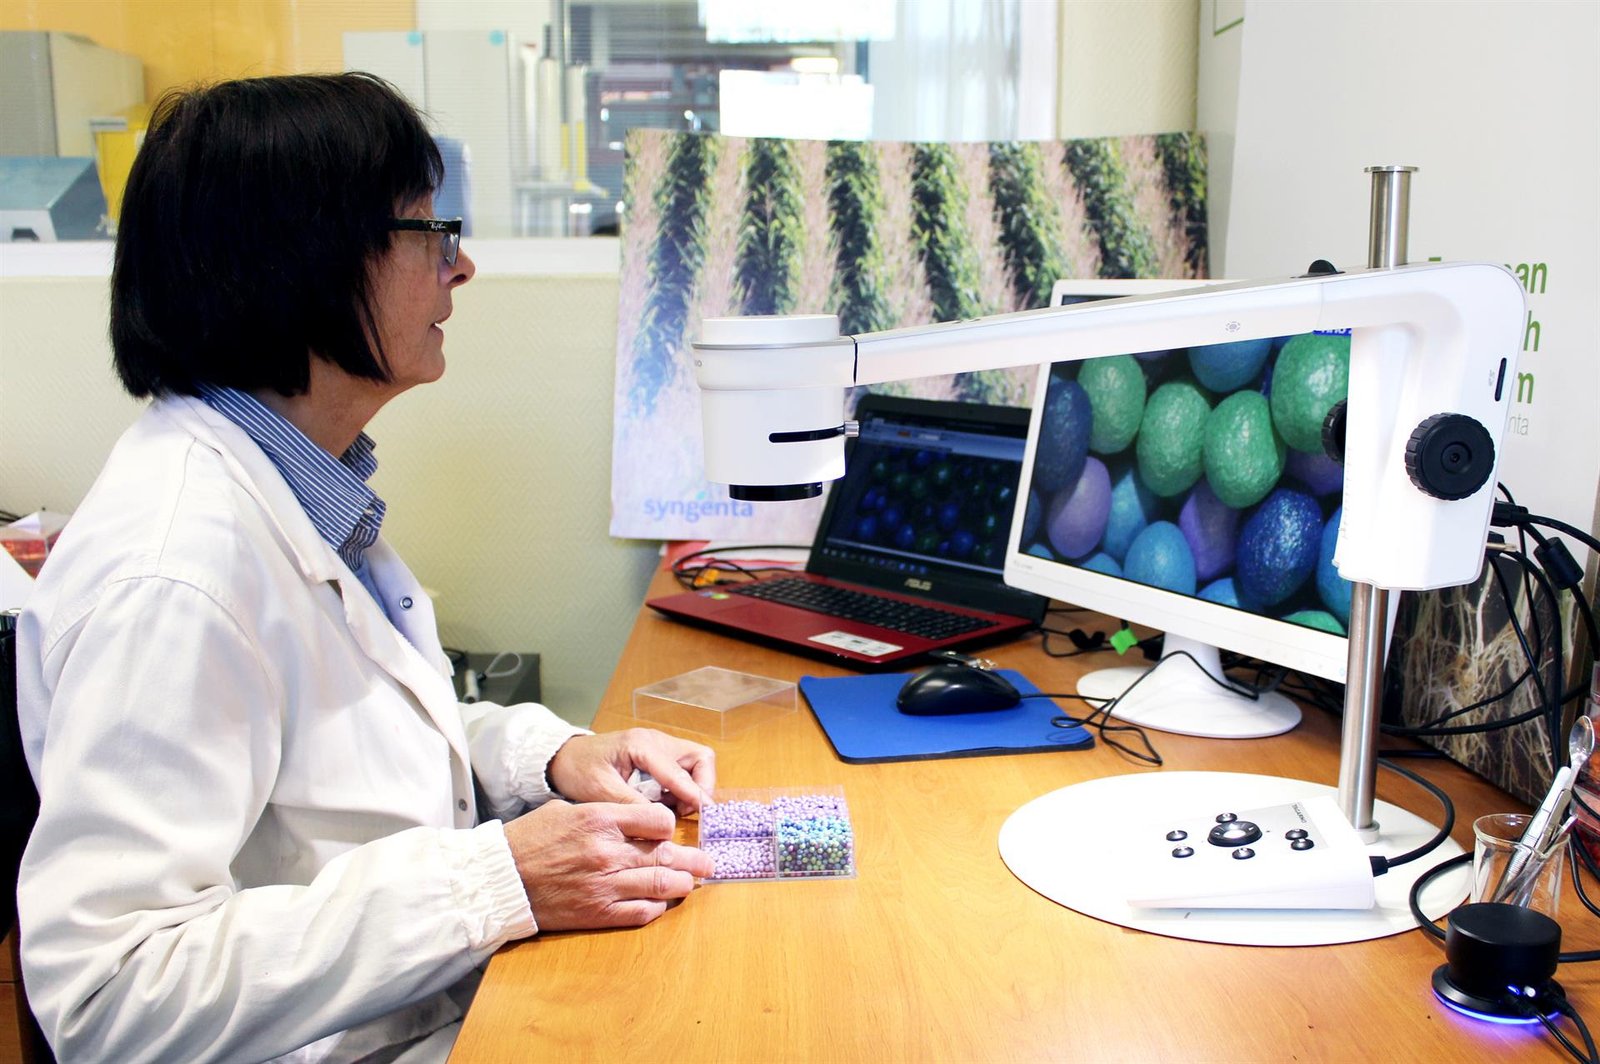 New digital microscopes to Inspect and document seed coating quality